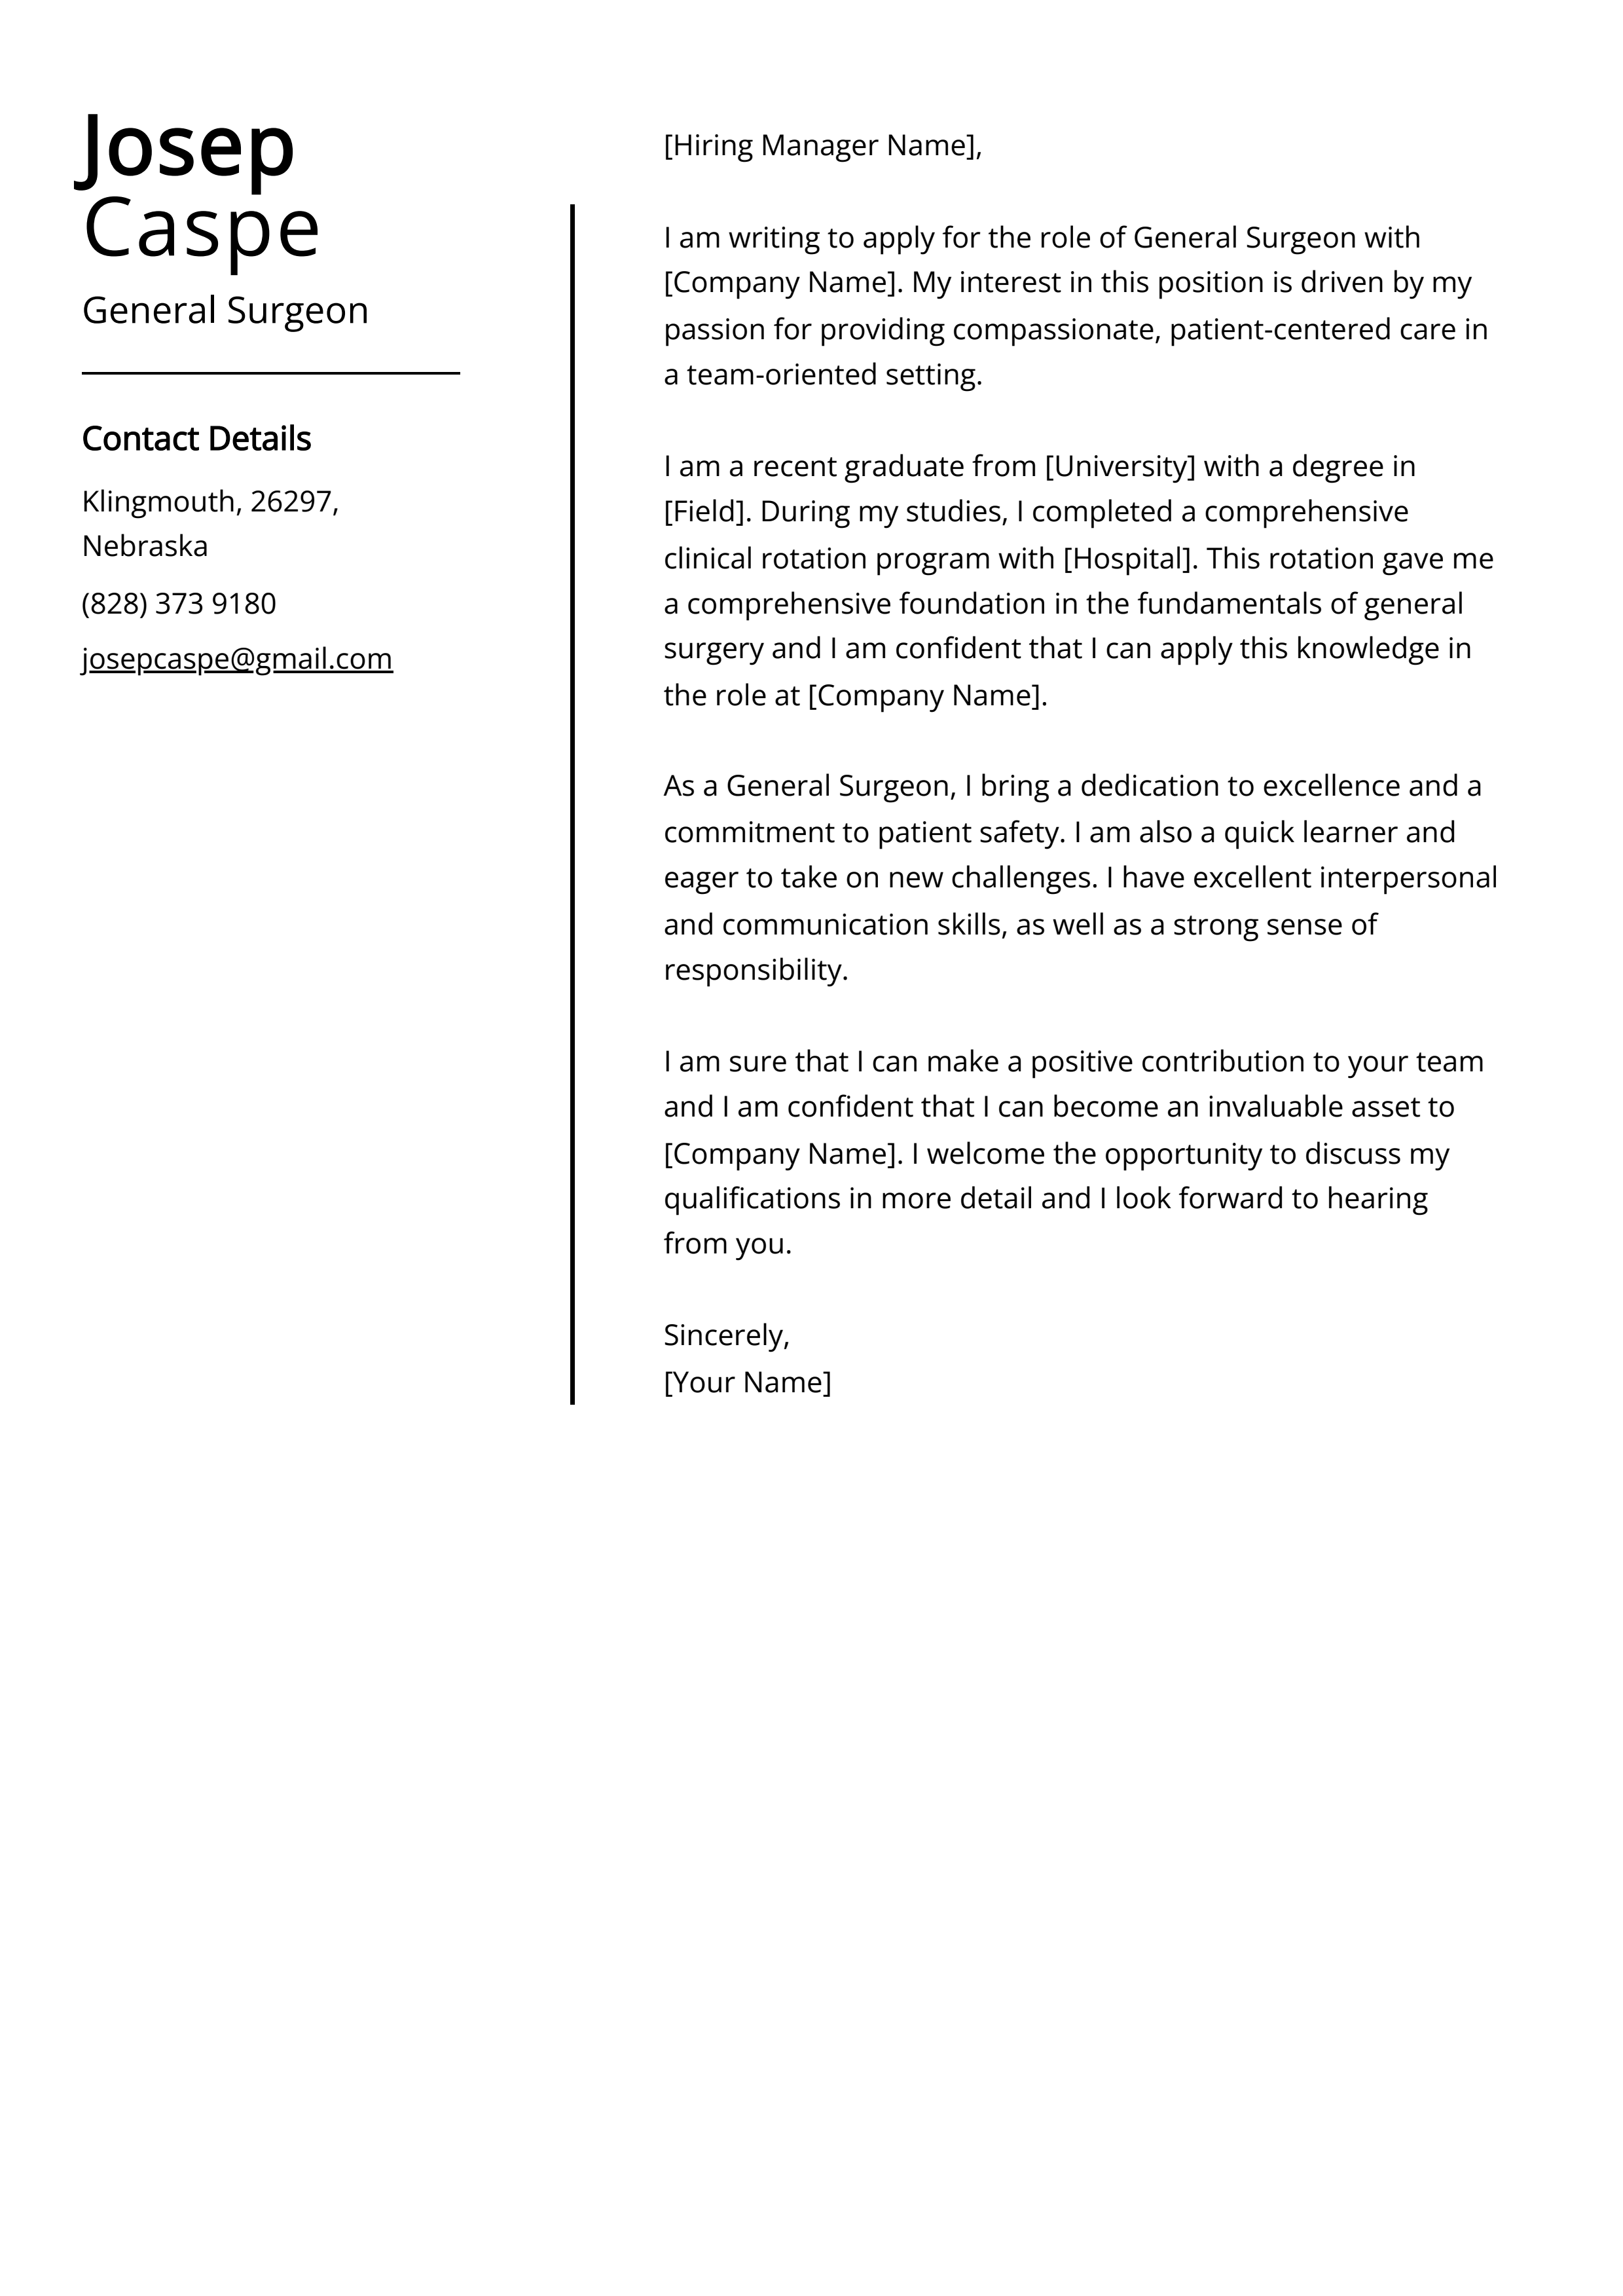 General Surgeon Cover Letter Example